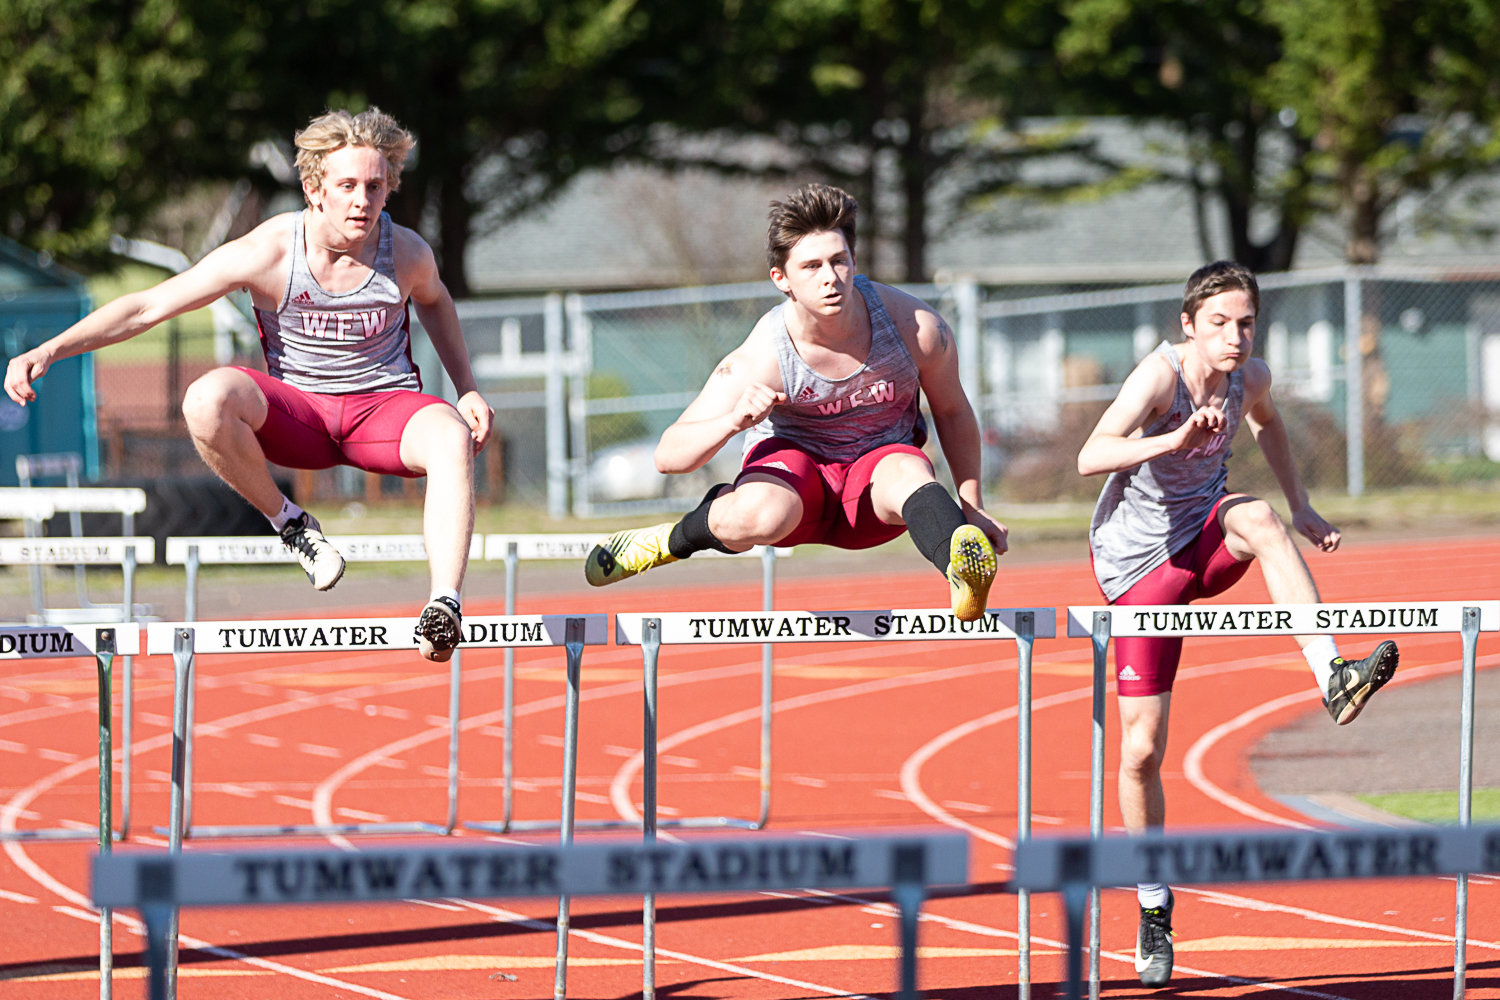 A trio of W.F. West hurdlers leap over an obstacle at Tumwater District Stadium March 29.